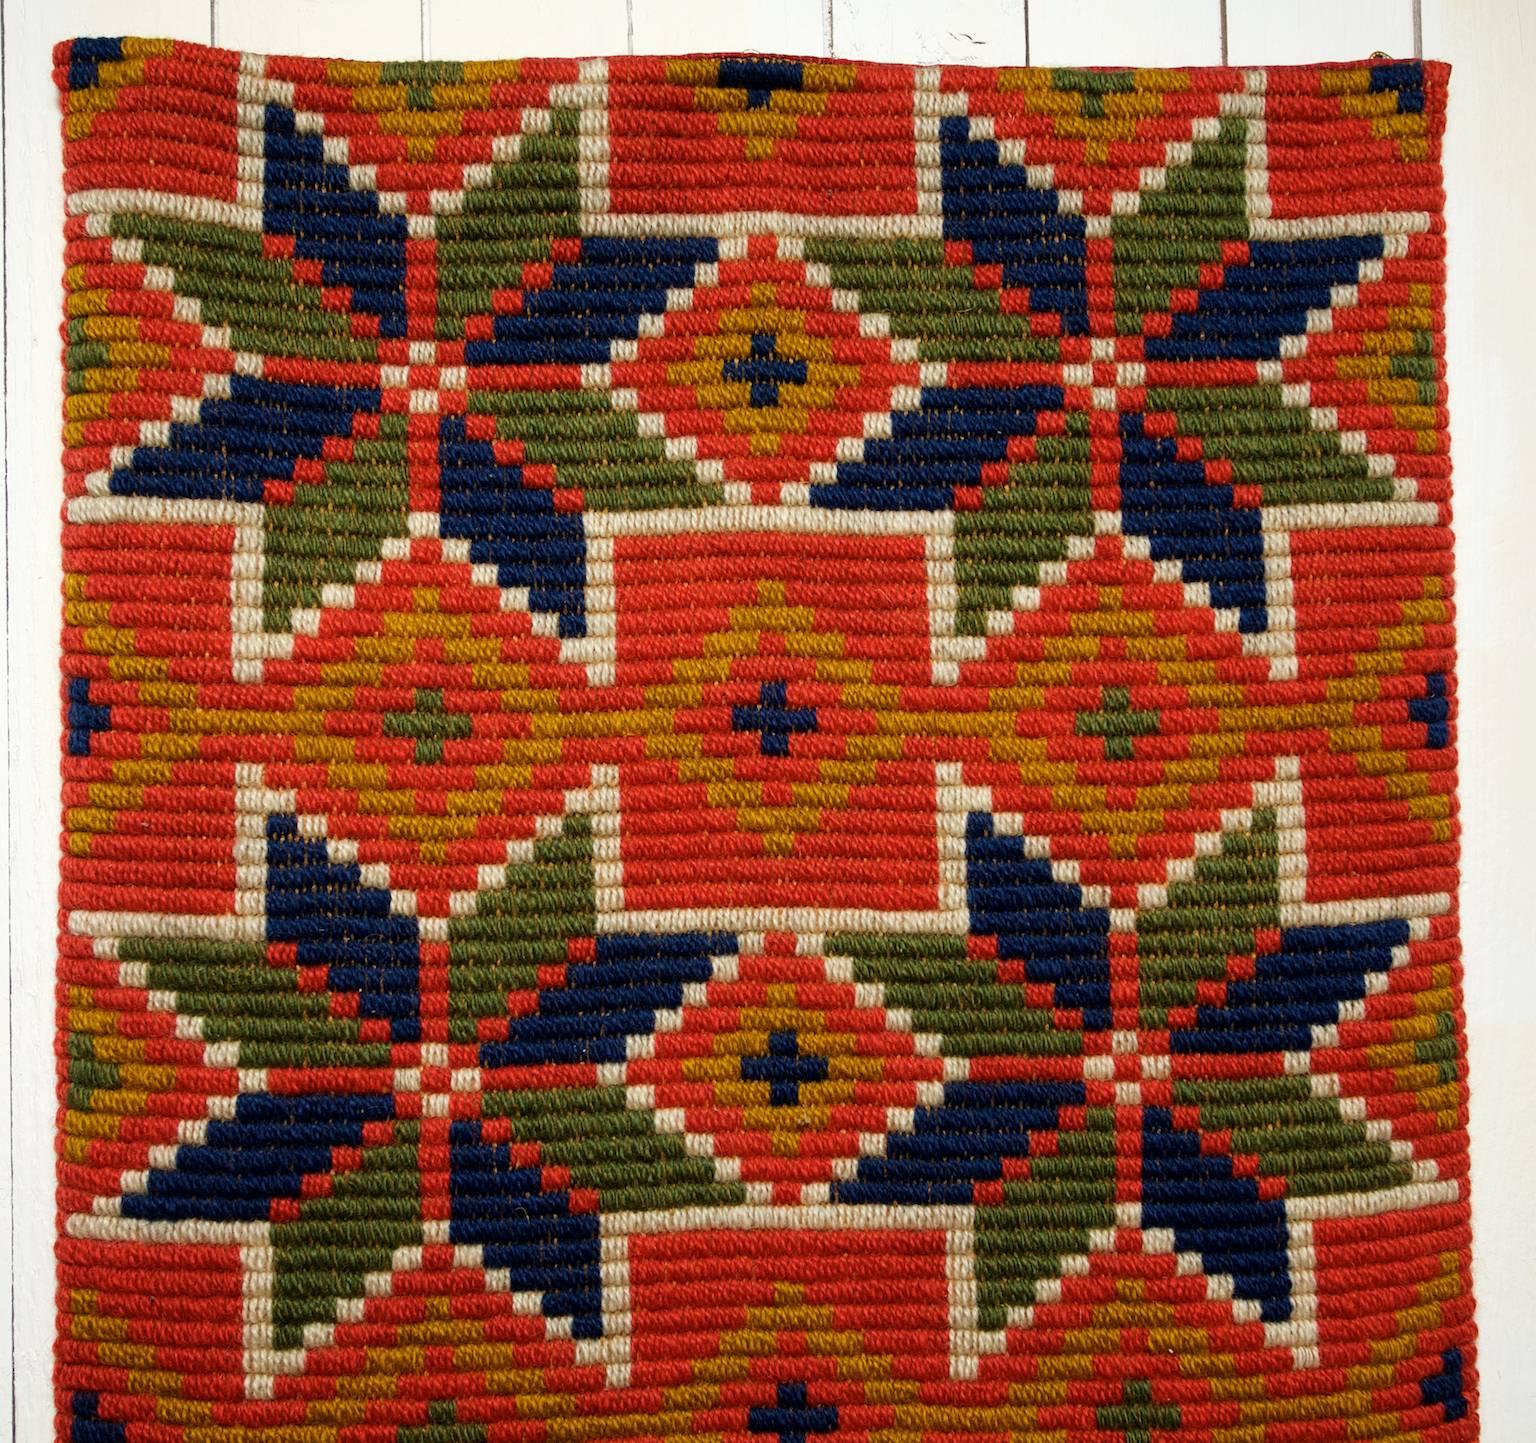 A beautiful traditional large handwoven wool wall hanging from Skåne in south of Sweden, problaby from Oxie or Skytts Härad according to the colours and pattern. 
This large wall hanging has been lined in modern time at the backside for protection